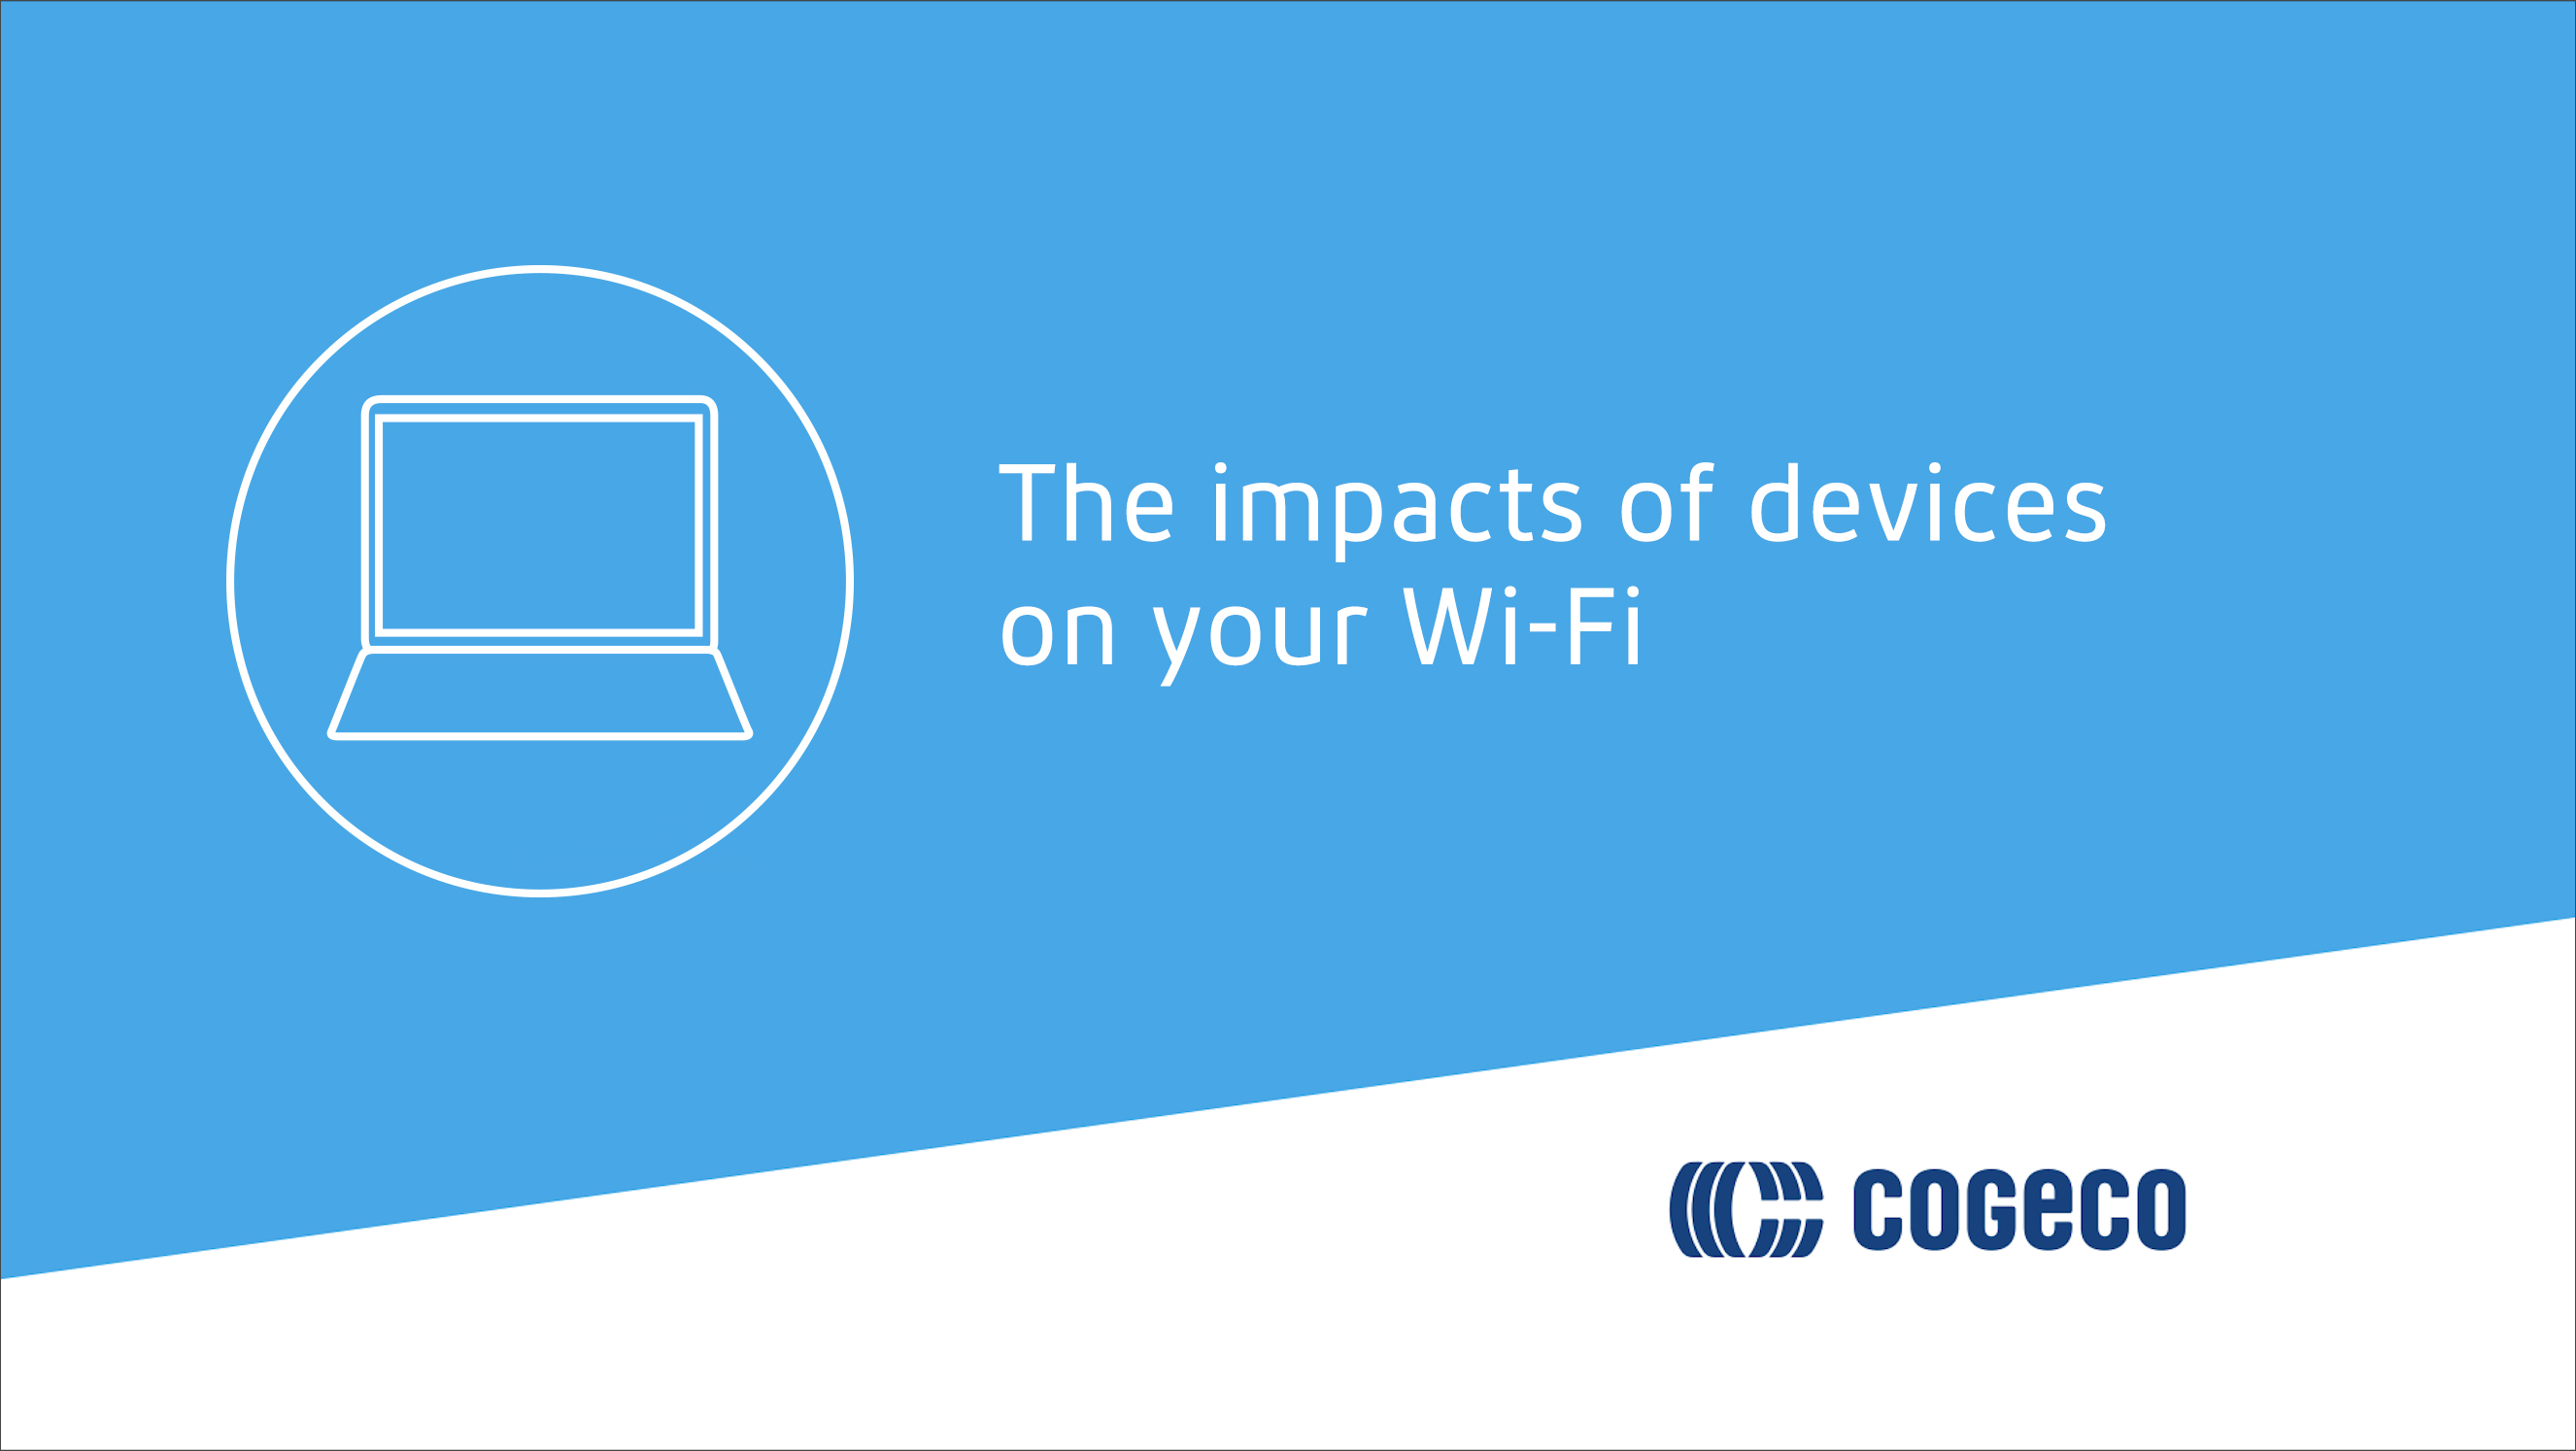 The impact of devices on your WI-FI